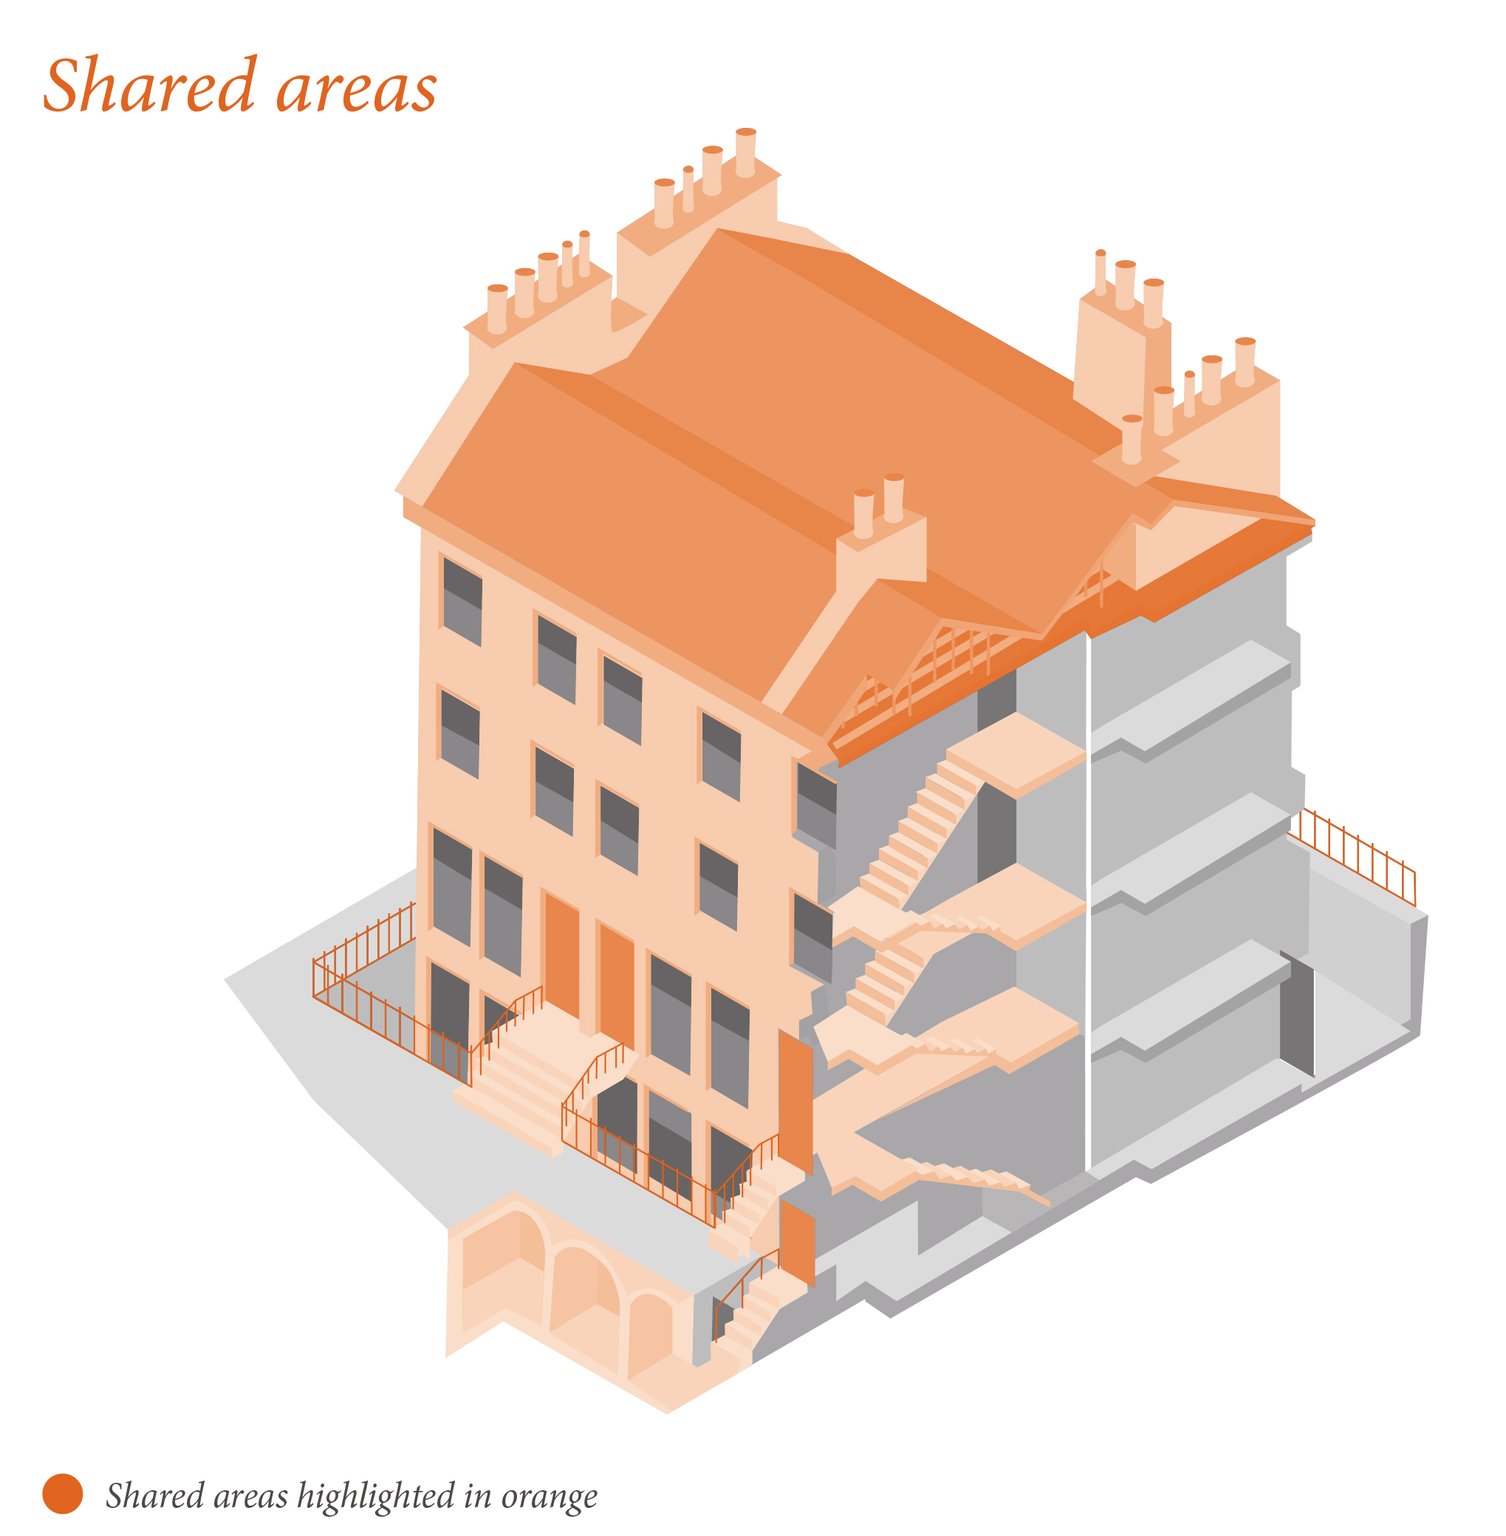 image of shared areas within a block of flats